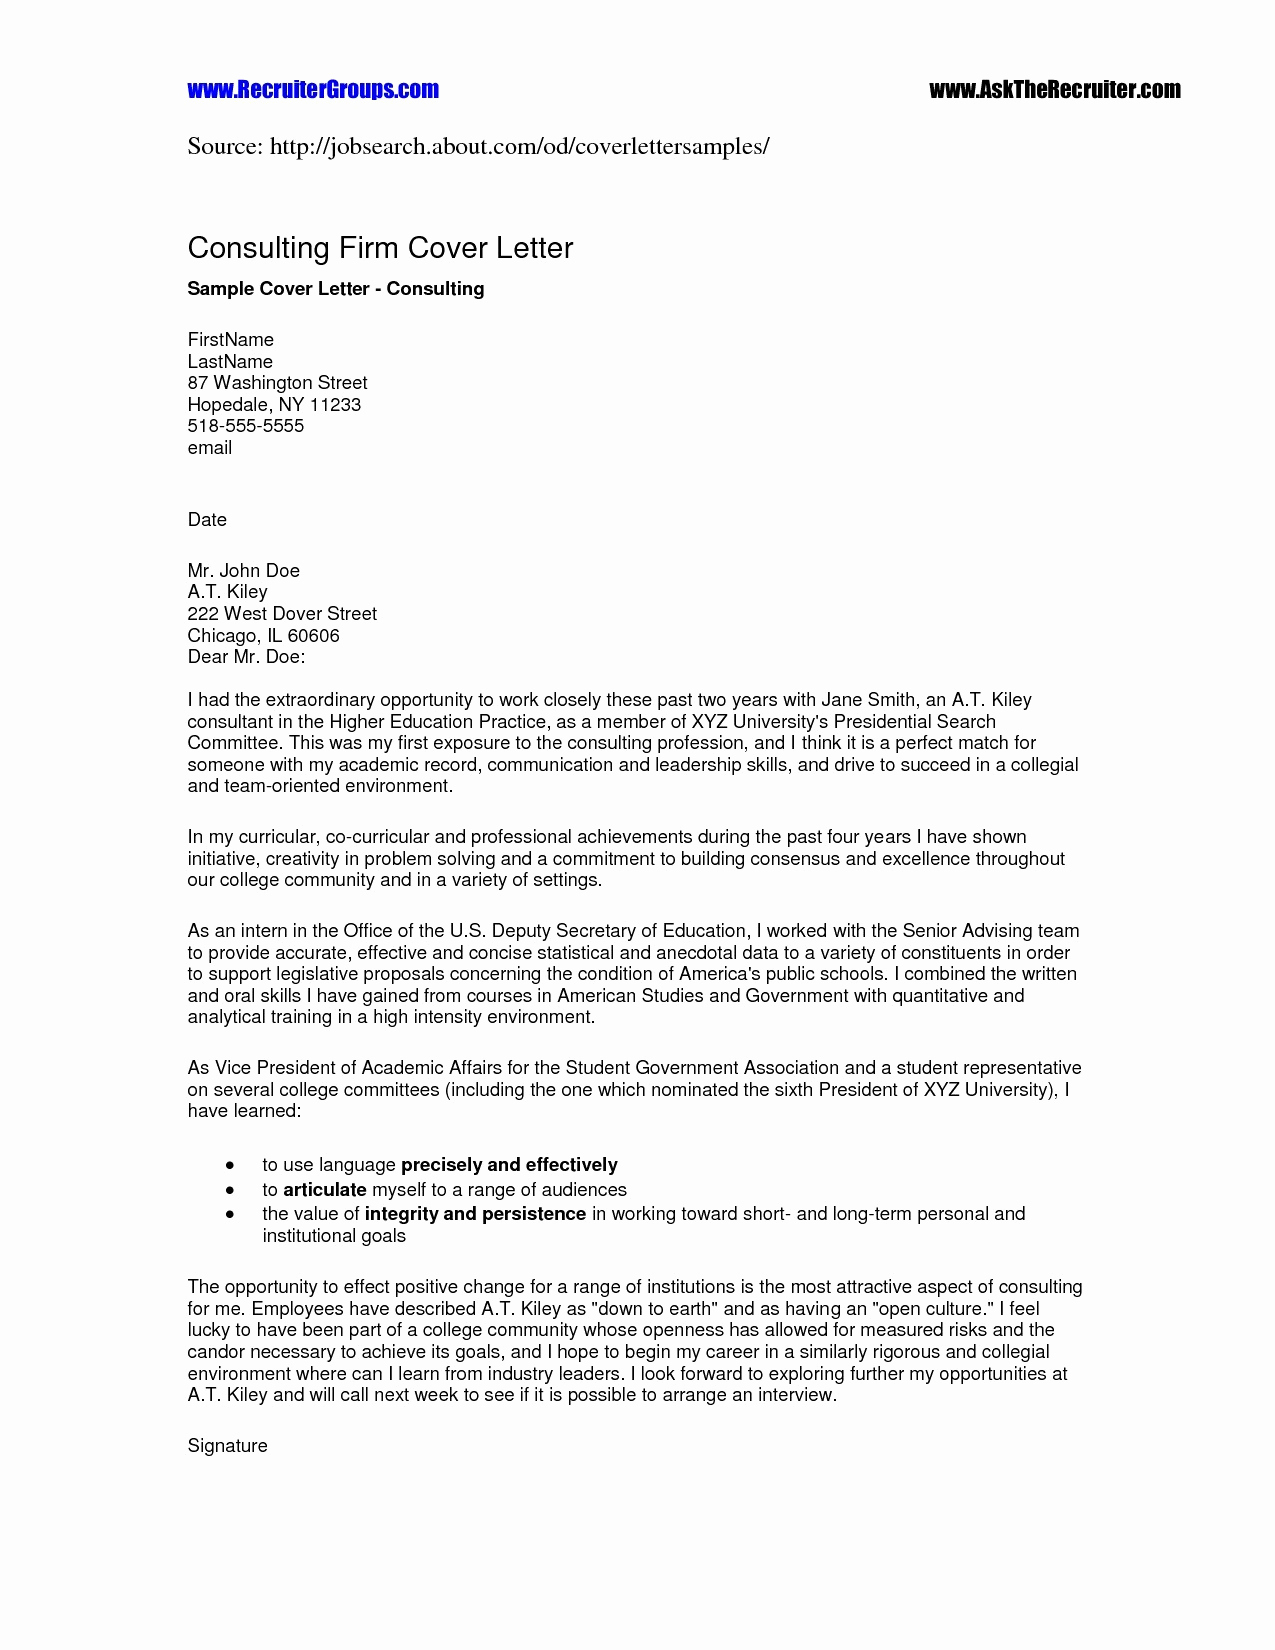 Police Officer Cover Letter Template - Police Ficer Cover Letters Beautiful Simple Resume Cover Letters